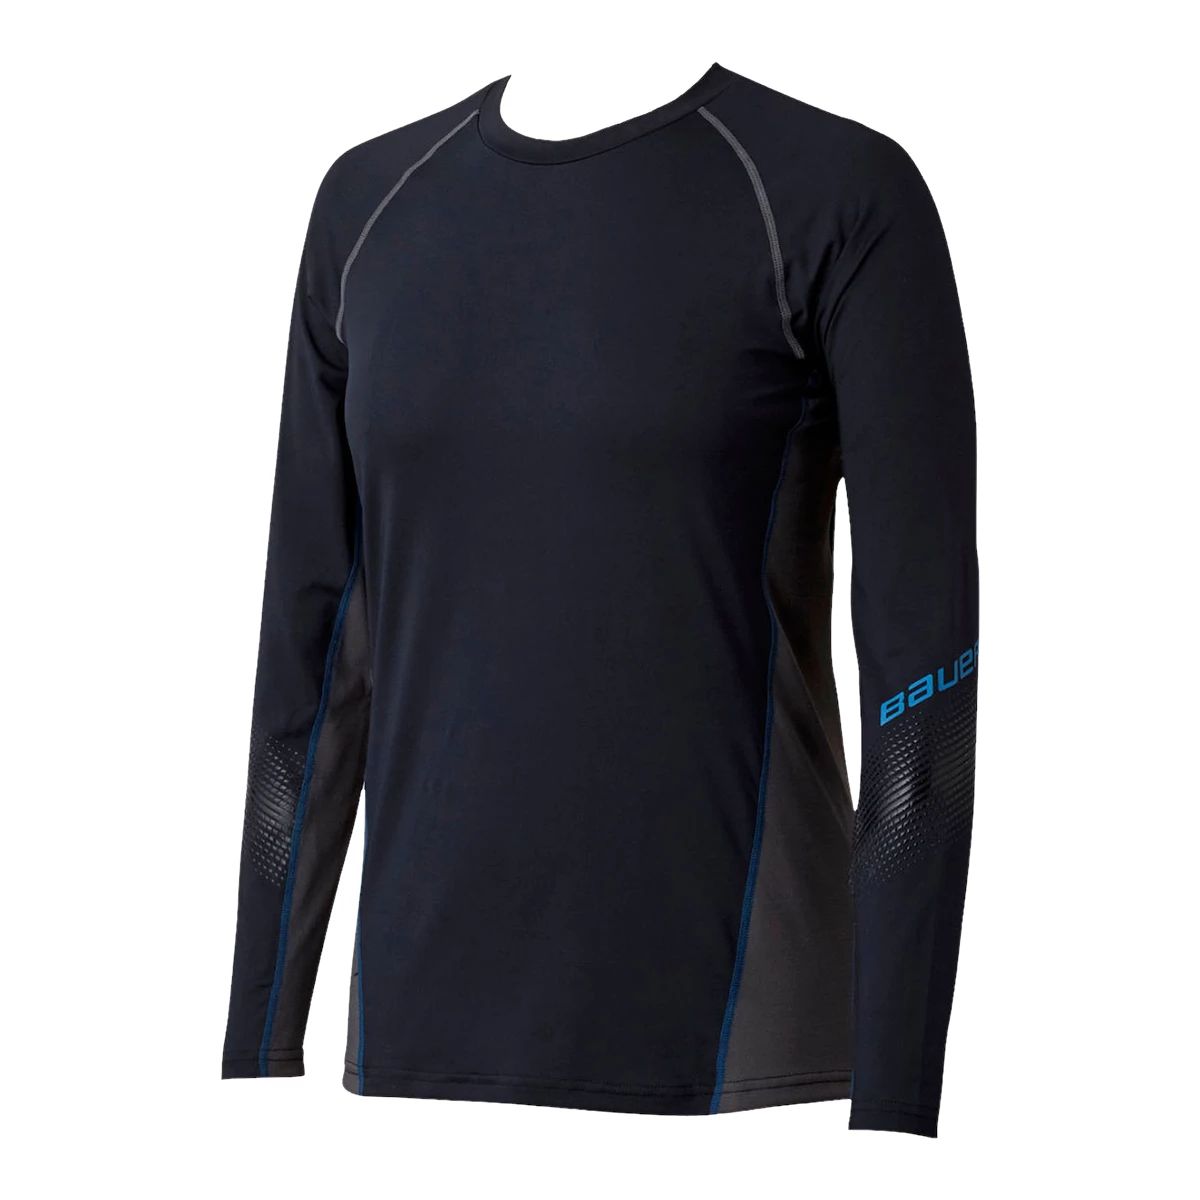 Image of Bauer Women’s Long Sleeve BL Top